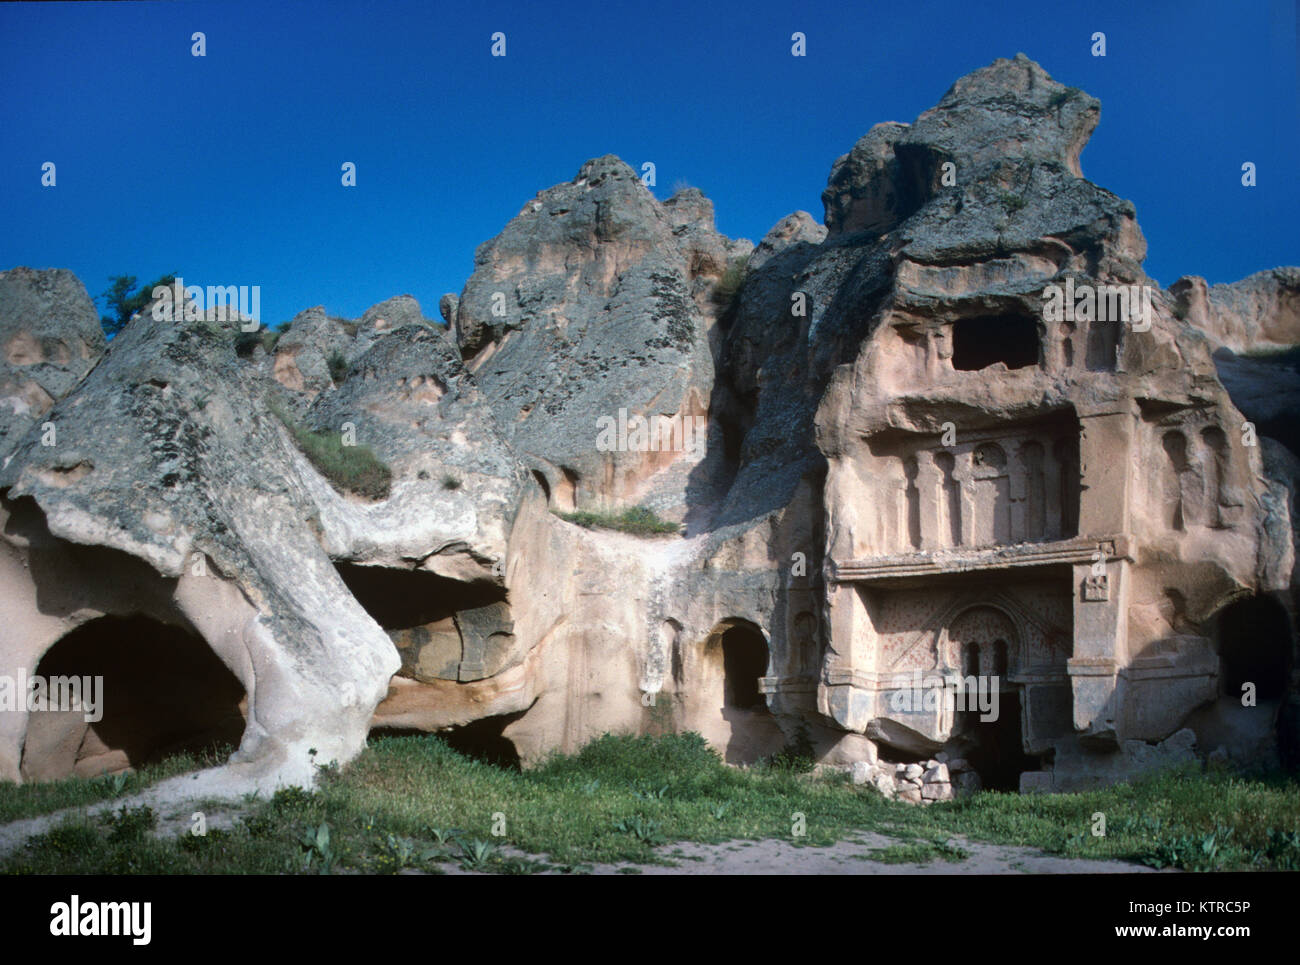 Troglodyte Complex of Cave Houses and a Byzantine Rock-Cut Monastery, known as the Open Palace, Carved Out of Soft Volcanic Tuff Rock near Gulsehir, ,Cappadocia, Turkey Stock Photo